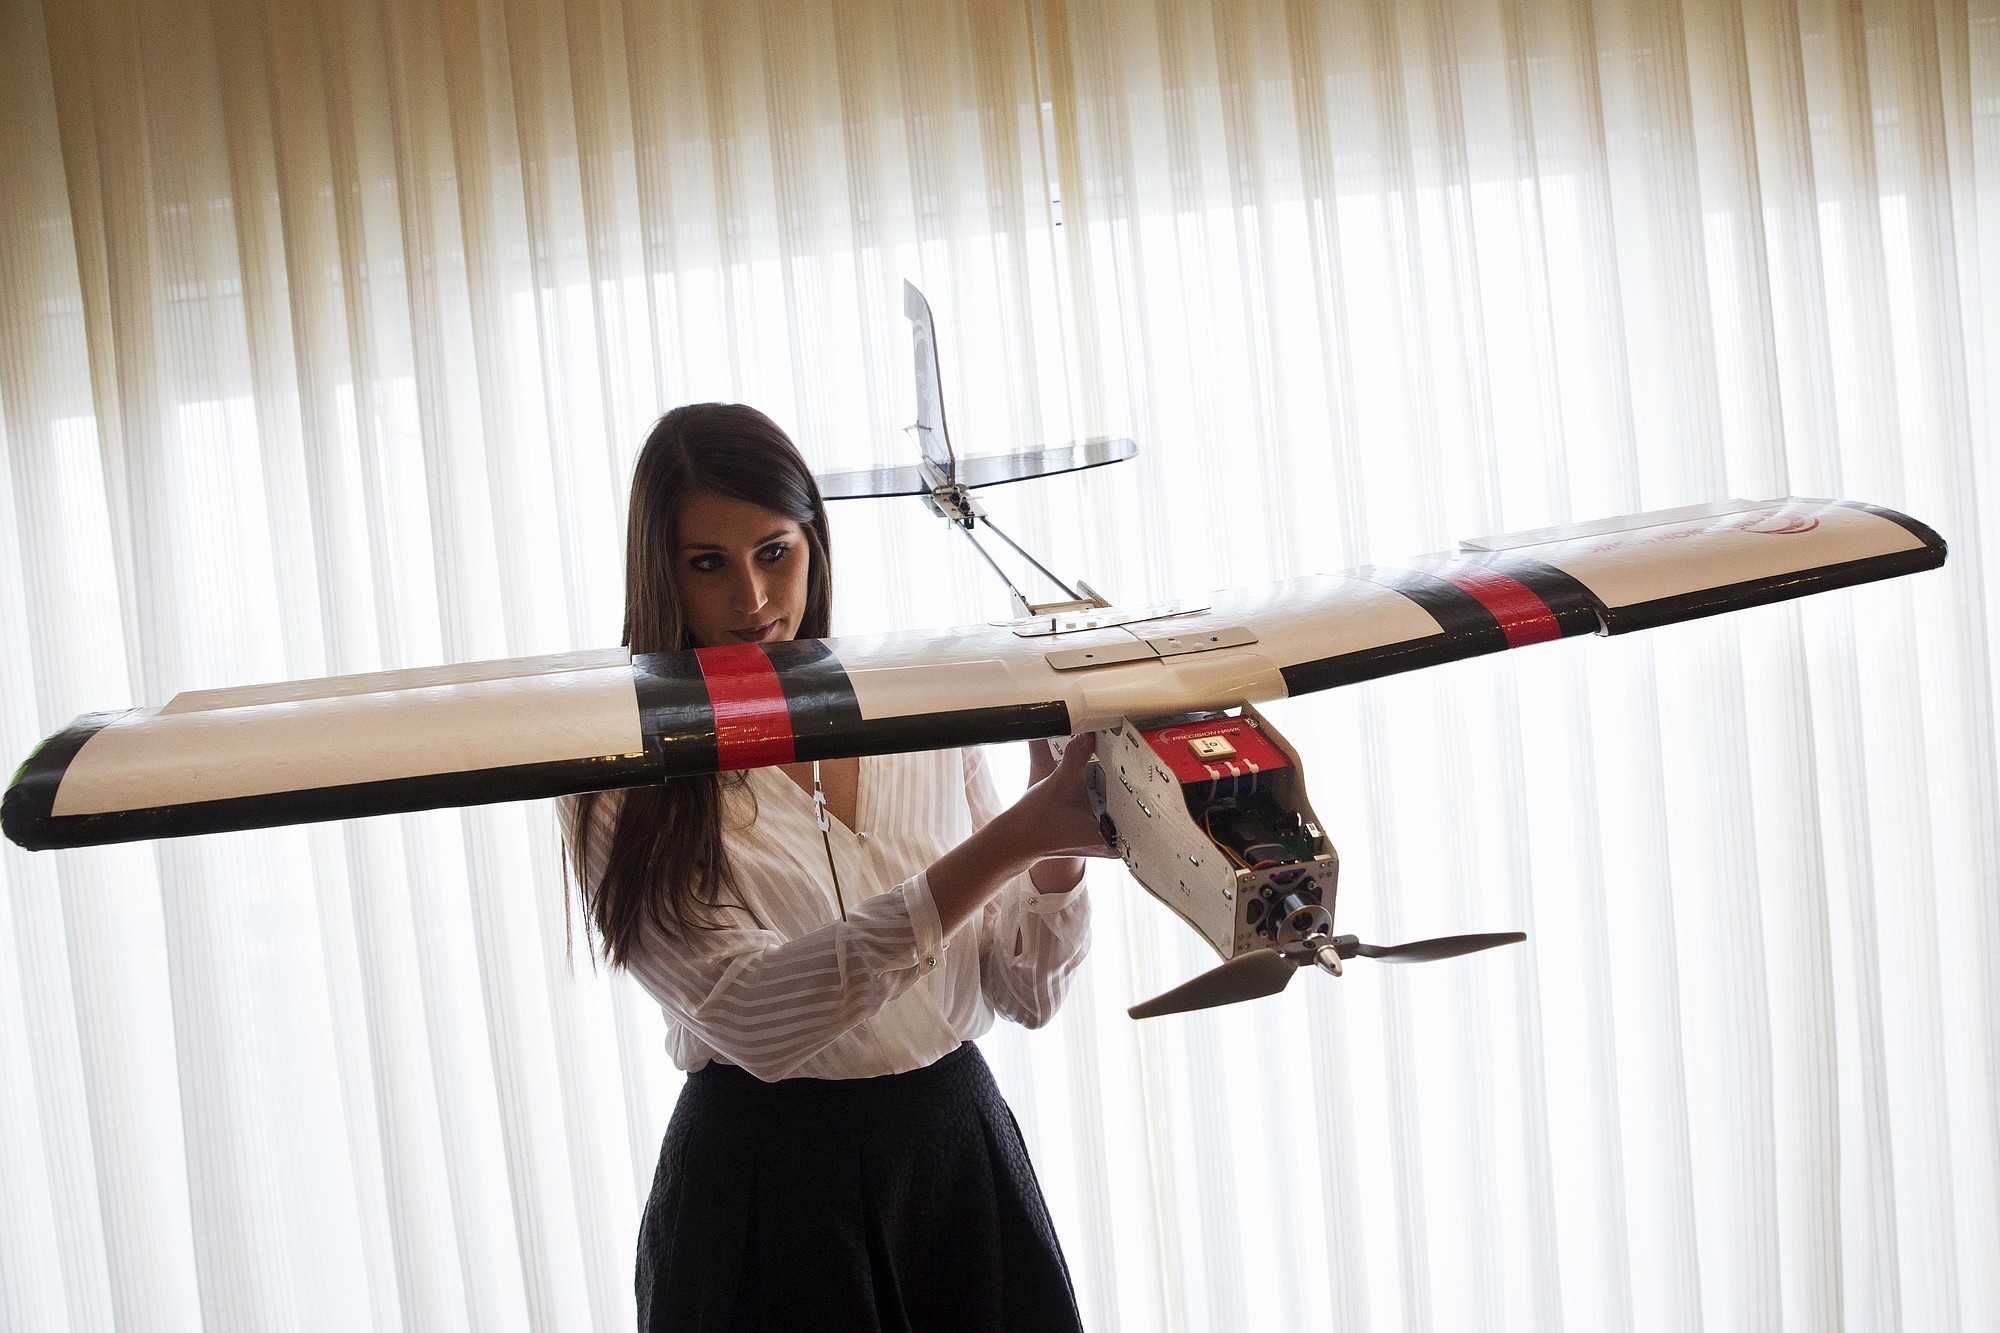 Lia Reich, director of marketing with PrecisionHawk, holds up their agricultural and insurance drone, the PrecisionHawk Lancaster, after a Tuesday event with the Small Unmanned Aerial Vehicles (UAV) Coalition, at the National Press Club in Washington.